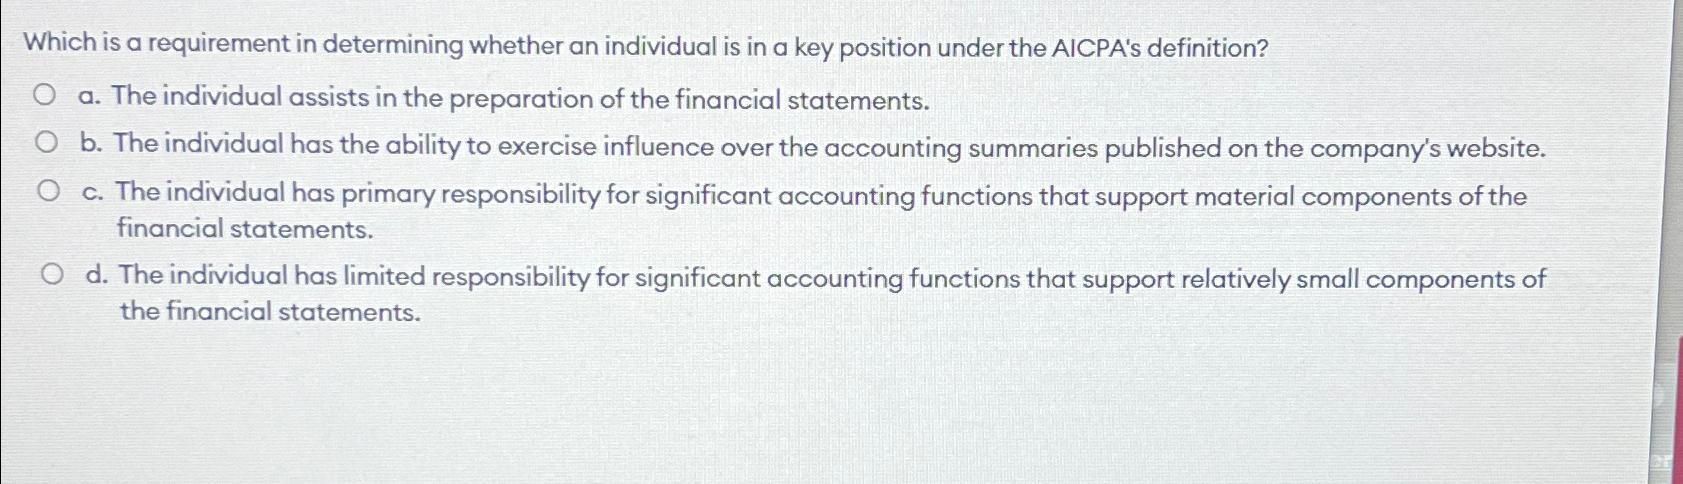 Which is a requirement in determining whether an individual is in a key position under the AICPA's